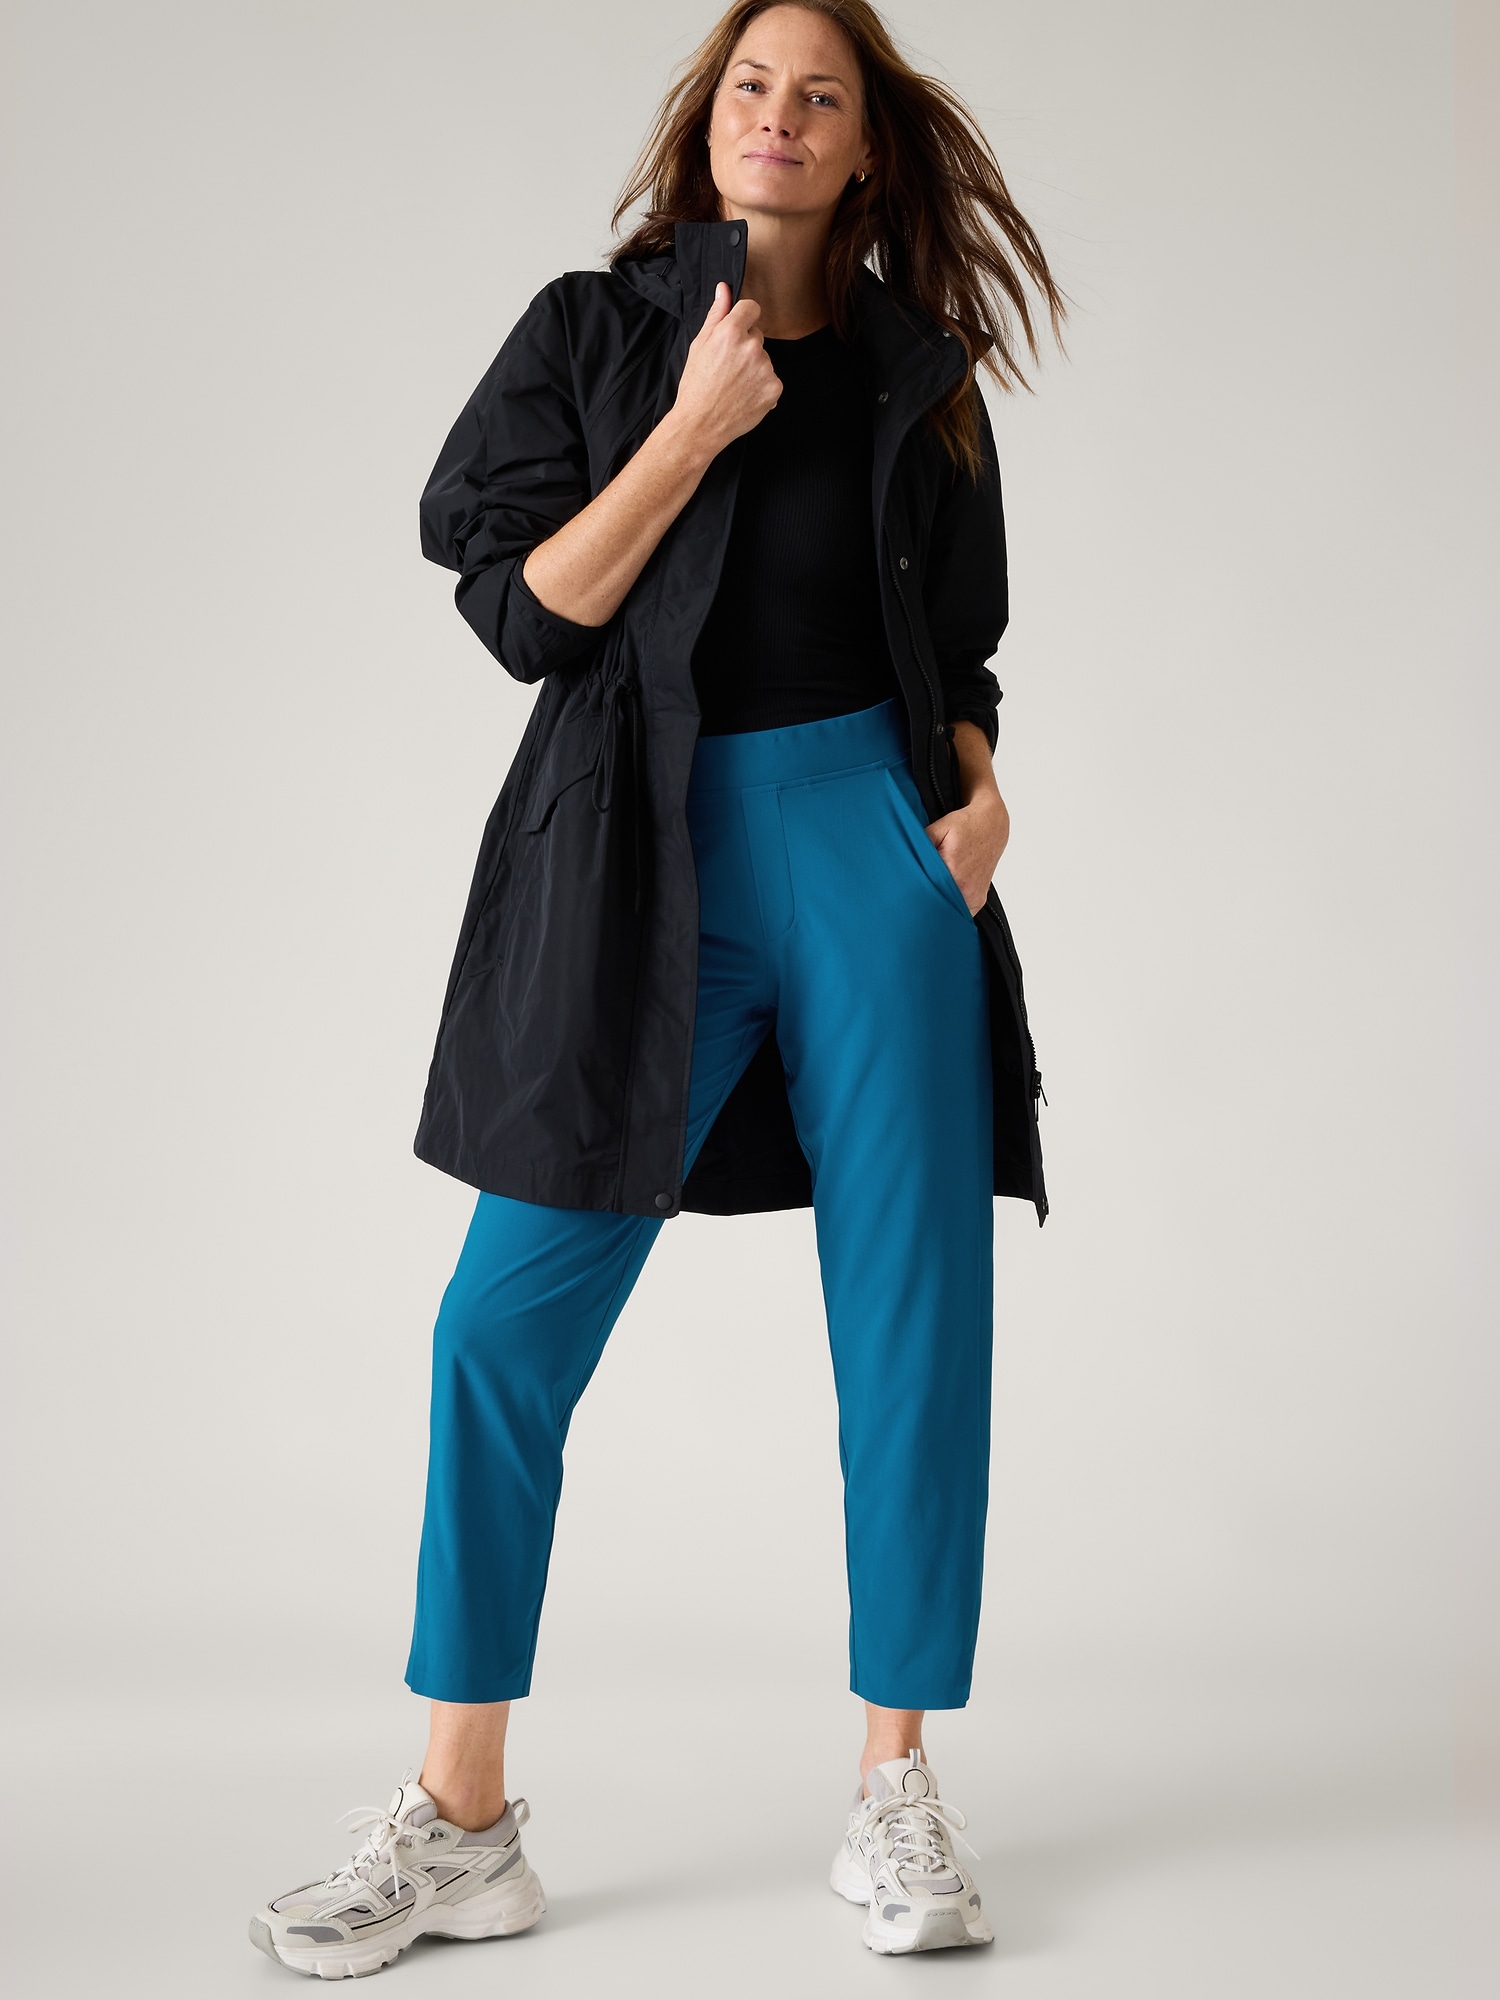 Athleta Brooklyn Pants, Review and Photo - Cruise Fashions & Beauty -  Cruise Critic Community